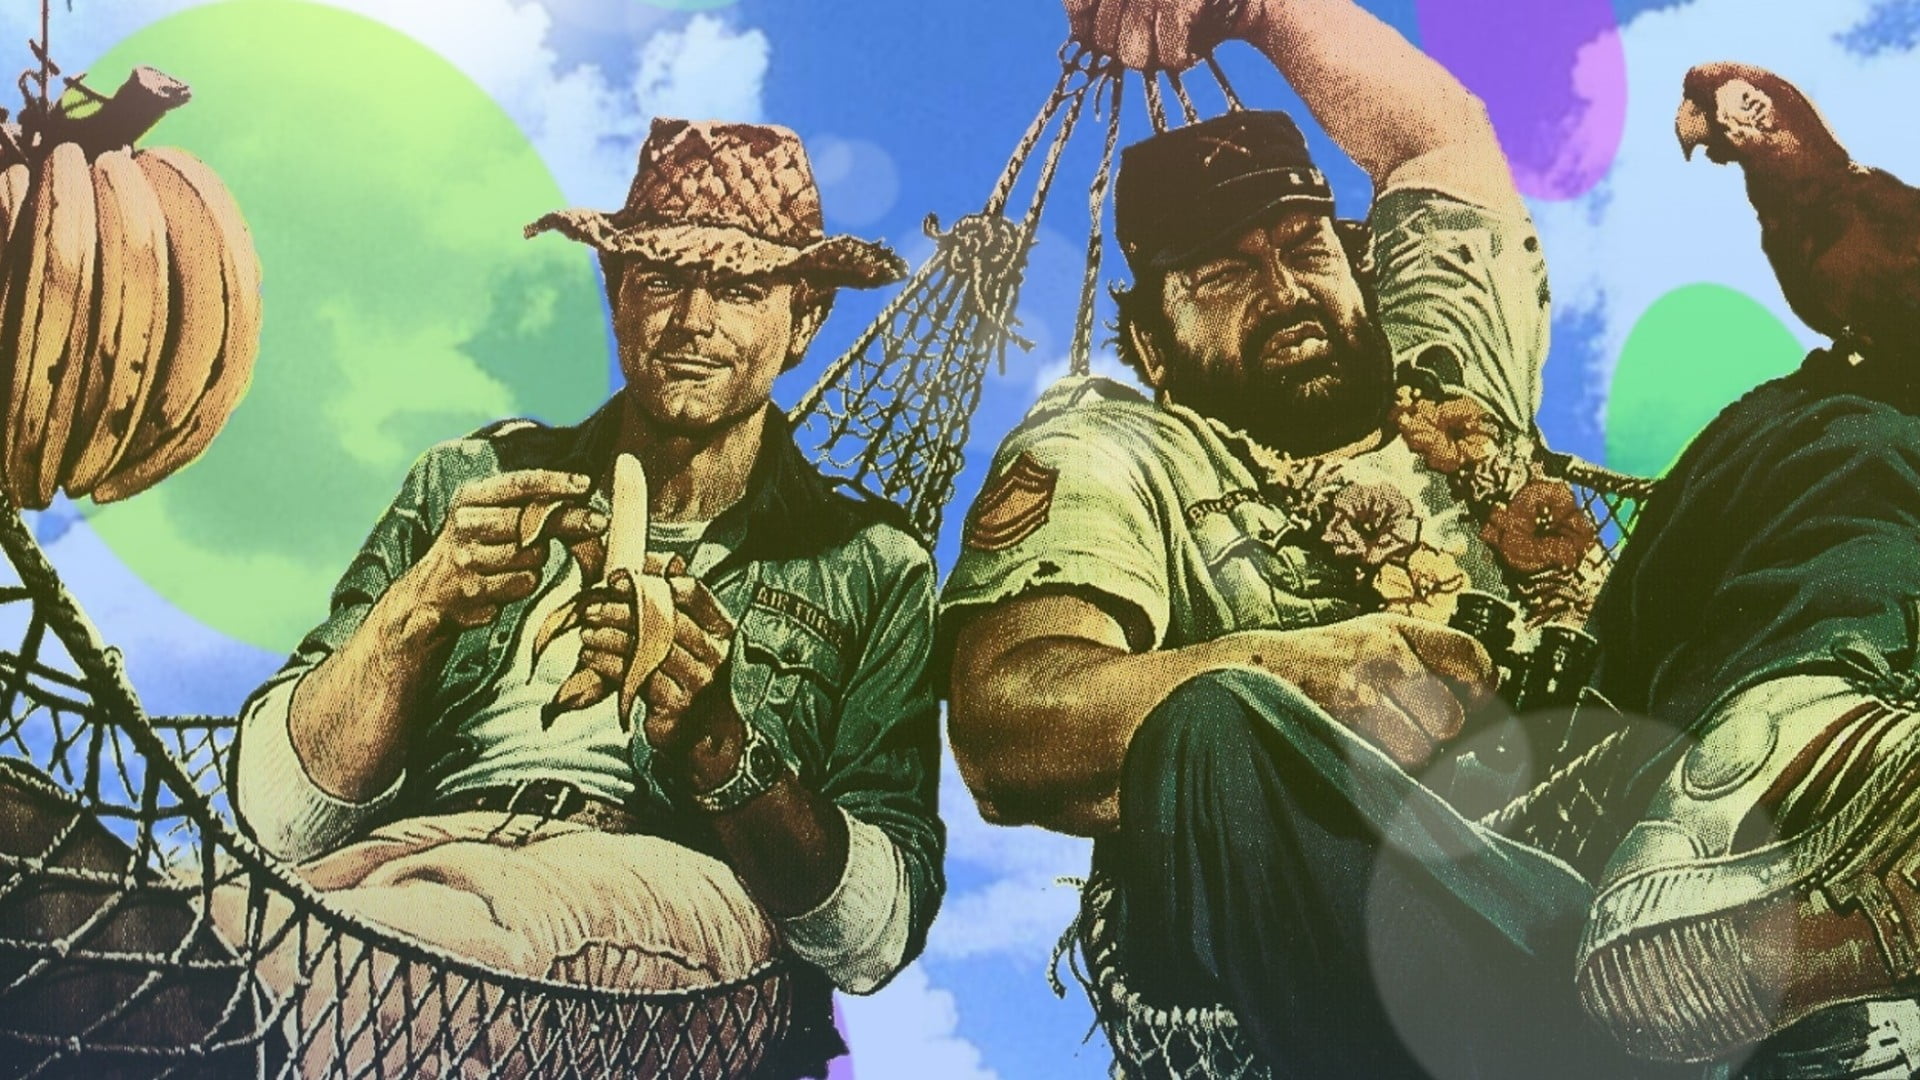 Nostalgic Tribute to Bud Spencer and Terence Hill - Iconic Duo Illustration  - Bud Spencer - Magnet